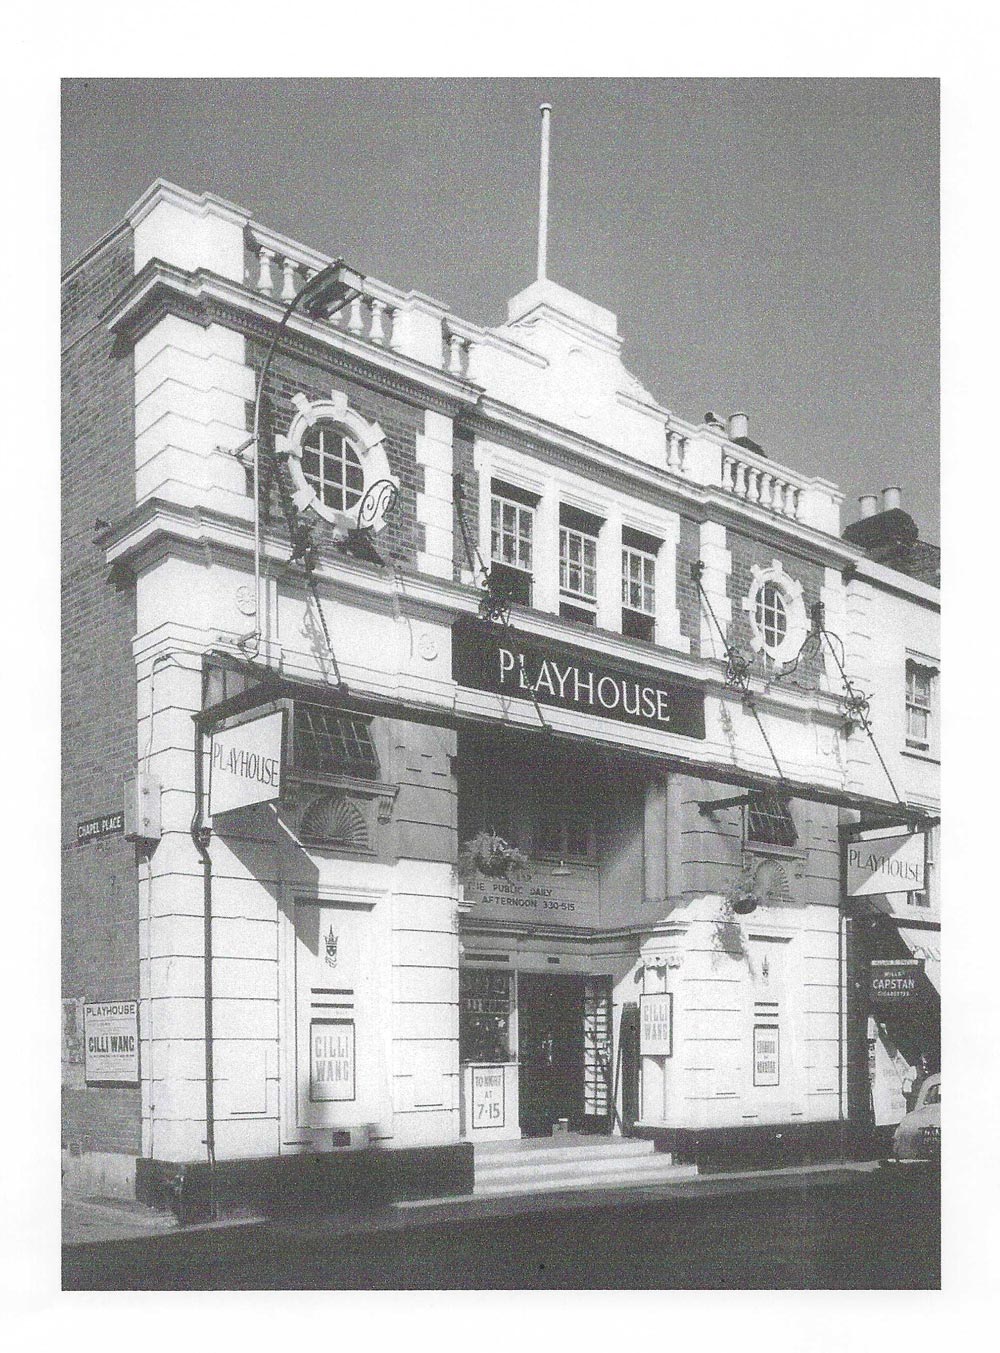 The Playhouse, pictured in the 1950s